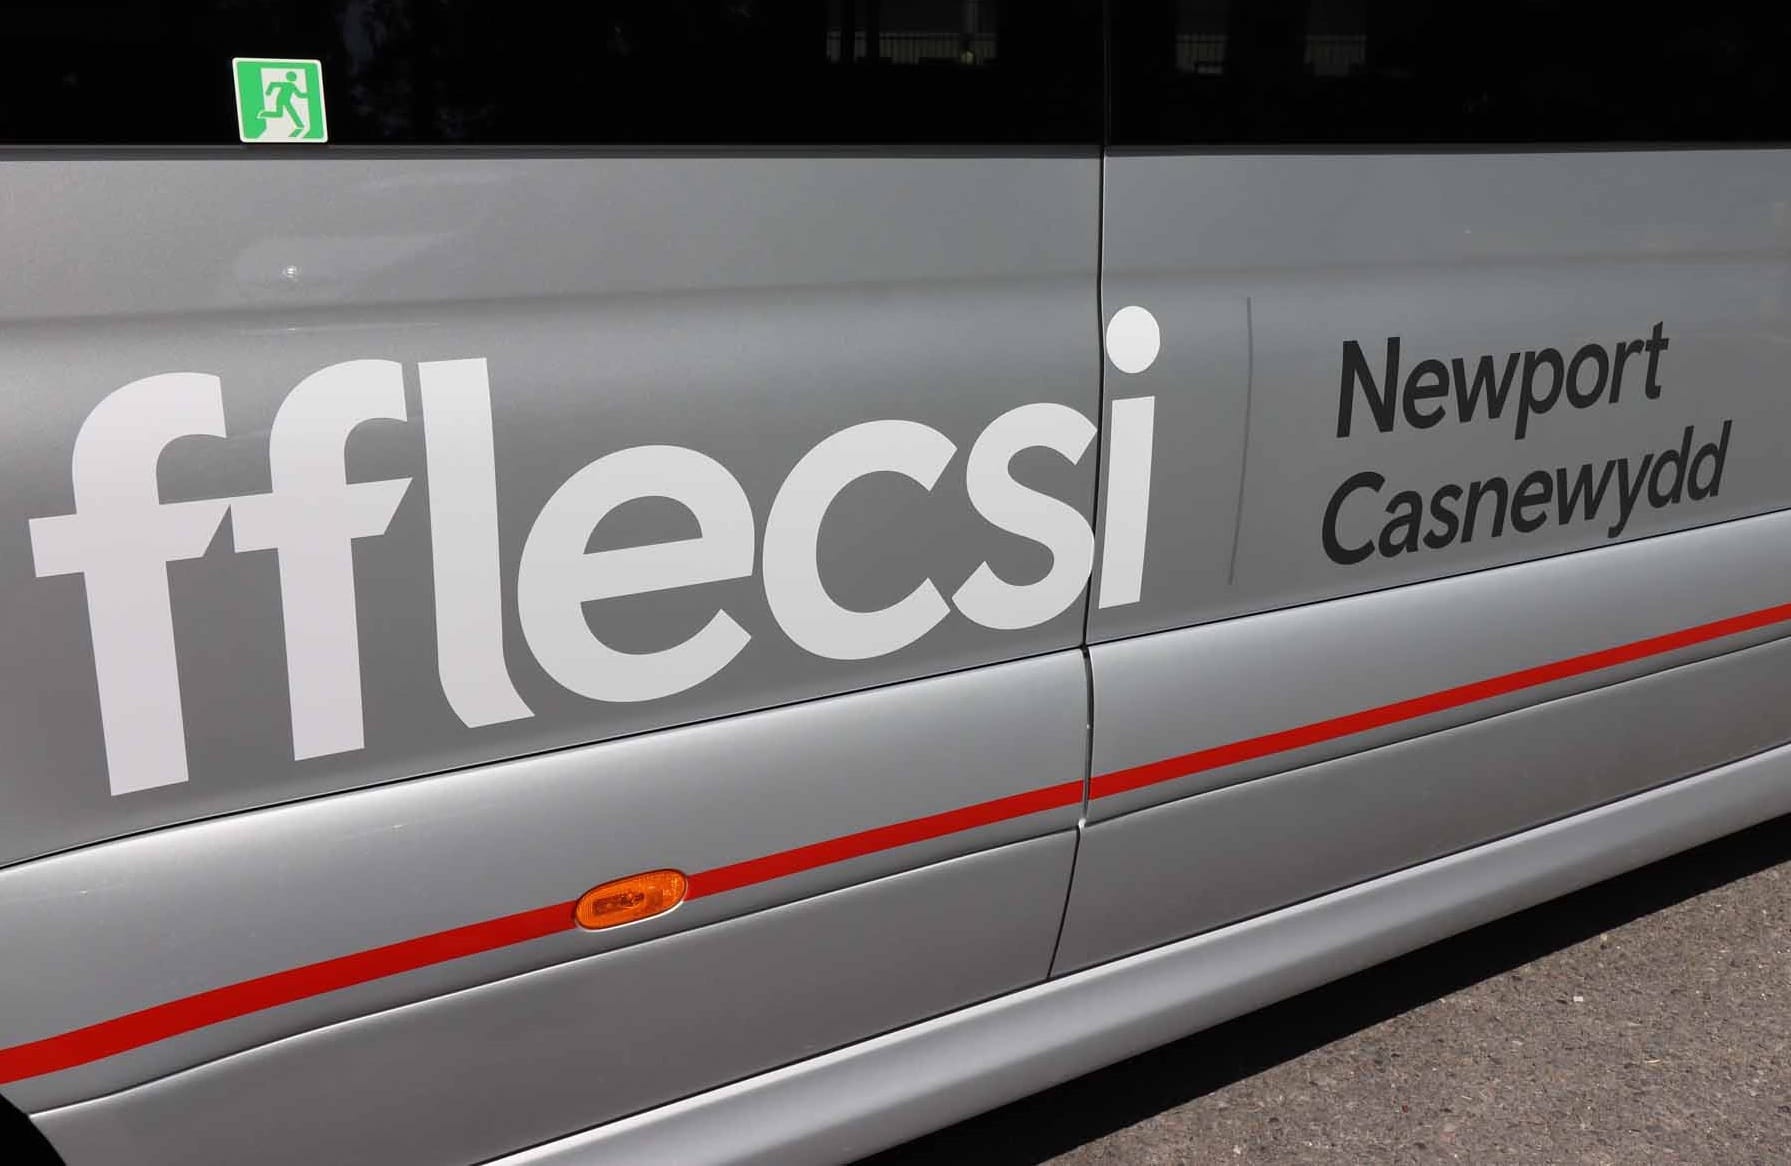 Fflecsi service in Newport to expand citywide